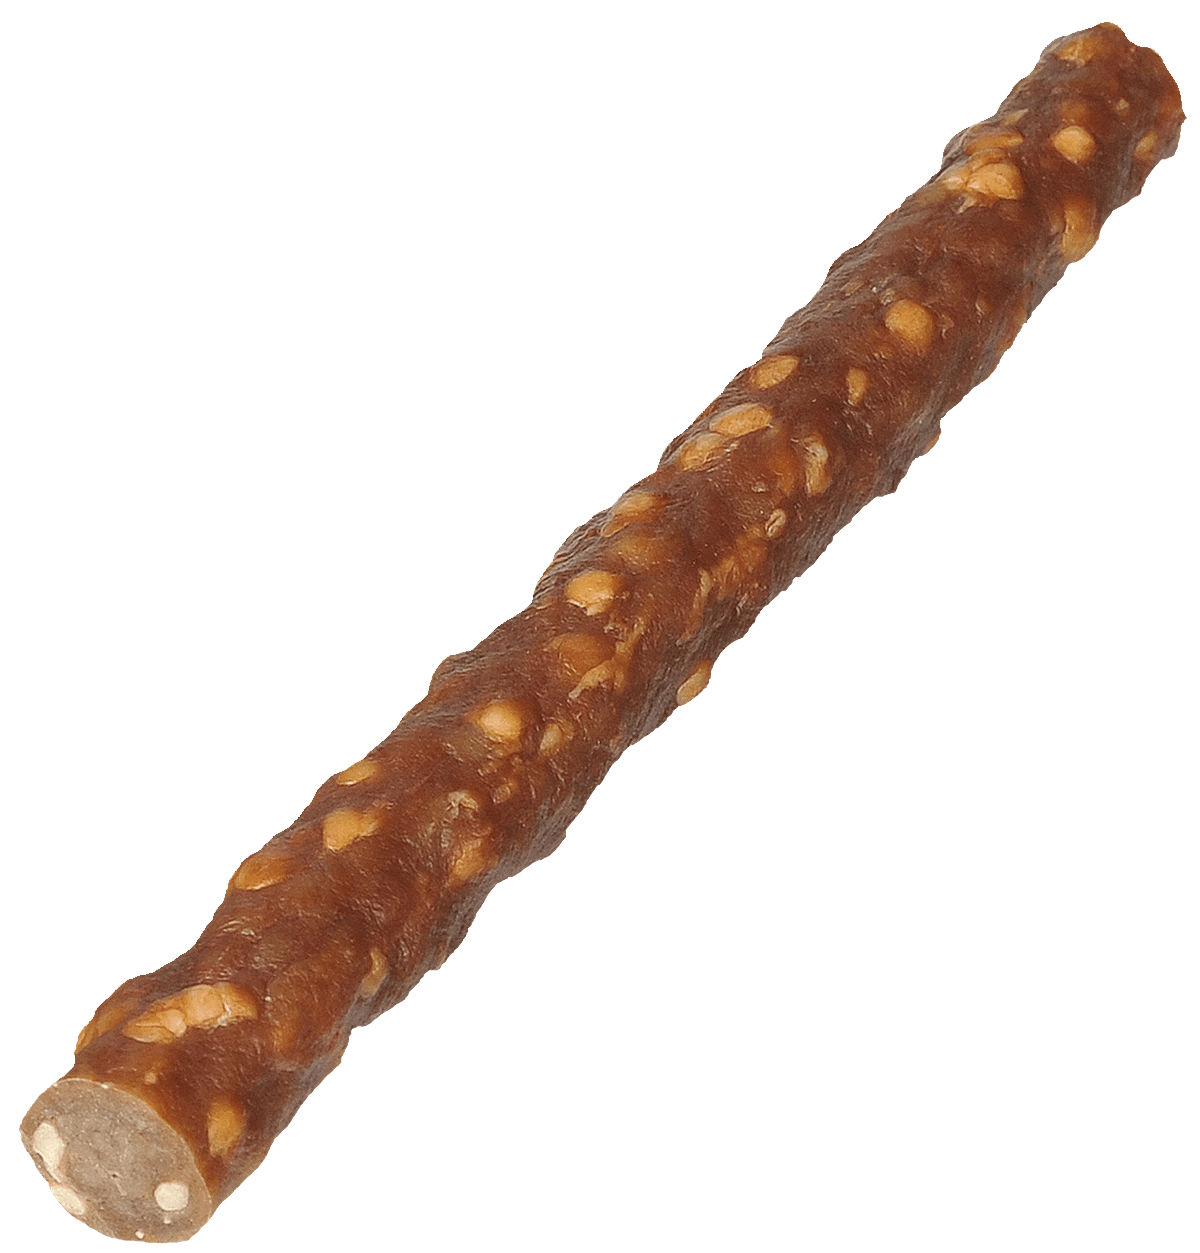 Veggie Sausage Small All Natural Daily Dental Treat for Dogs - Whimzees®